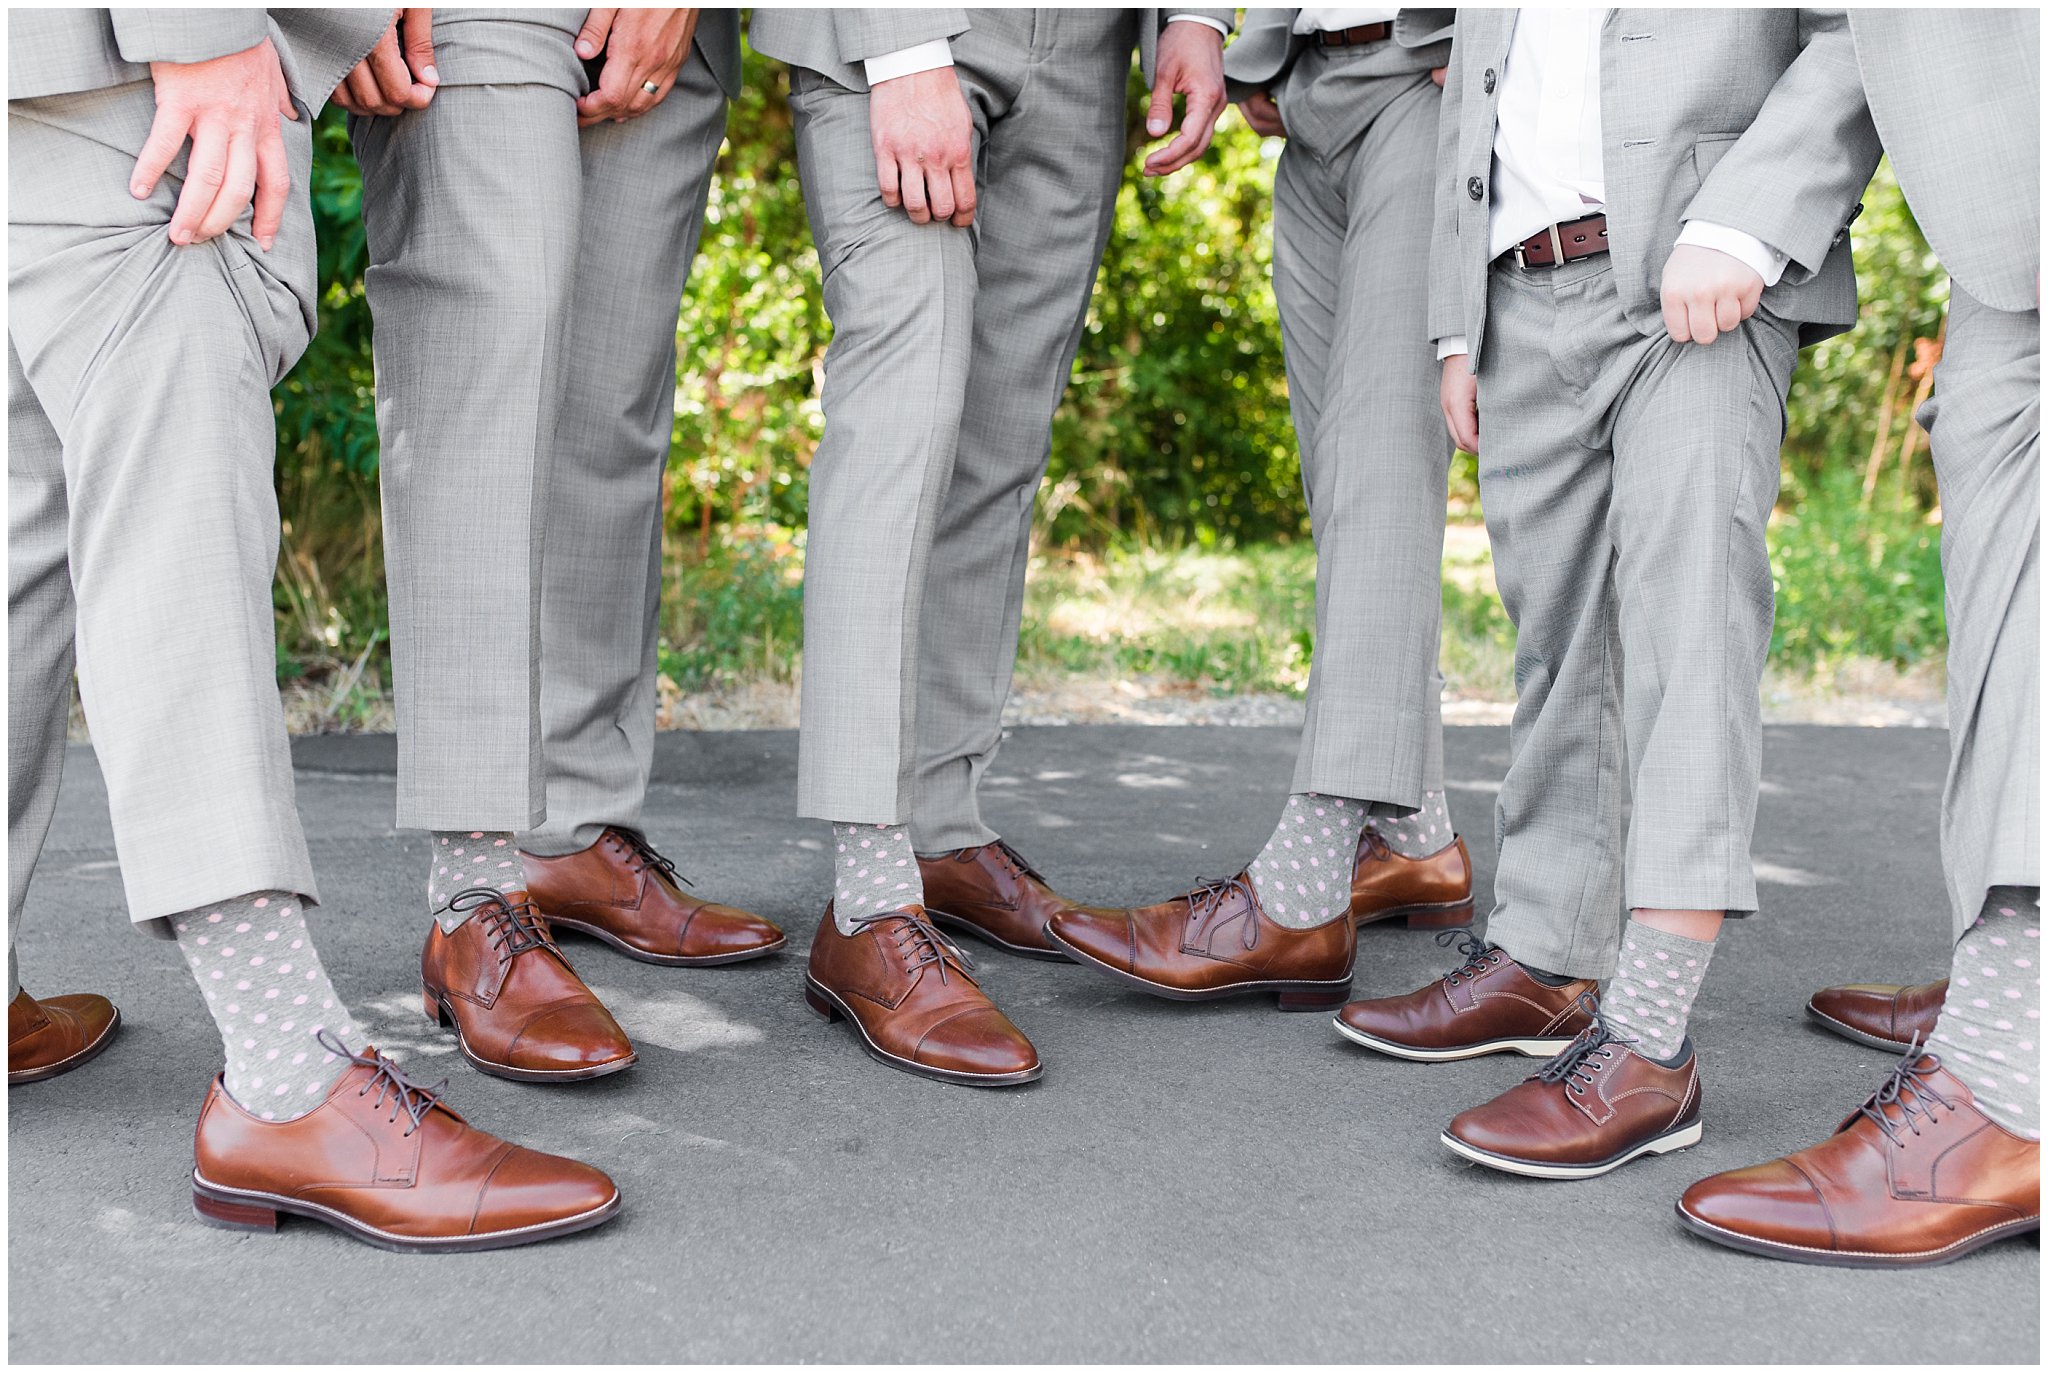 Groomsmen in gray suits and gray socks with pink polka dots | Oak Hills Utah Dusty Rose and Gray Summer Wedding | Jessie and Dallin Photography